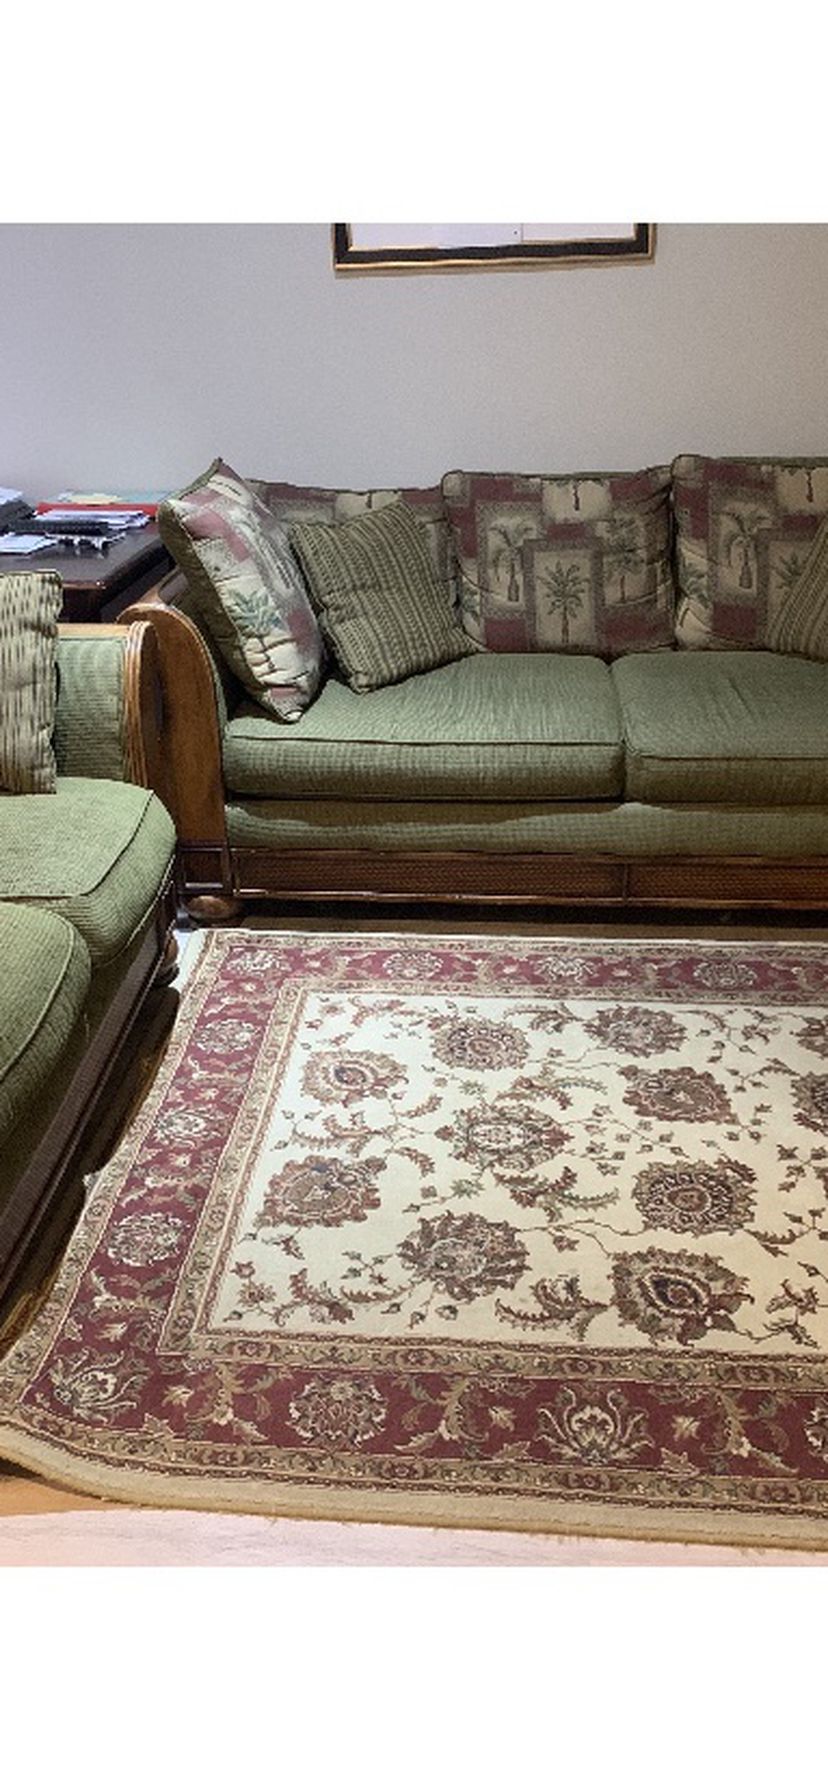 Sofa and Loveseat 299.00 Carpet Is Free